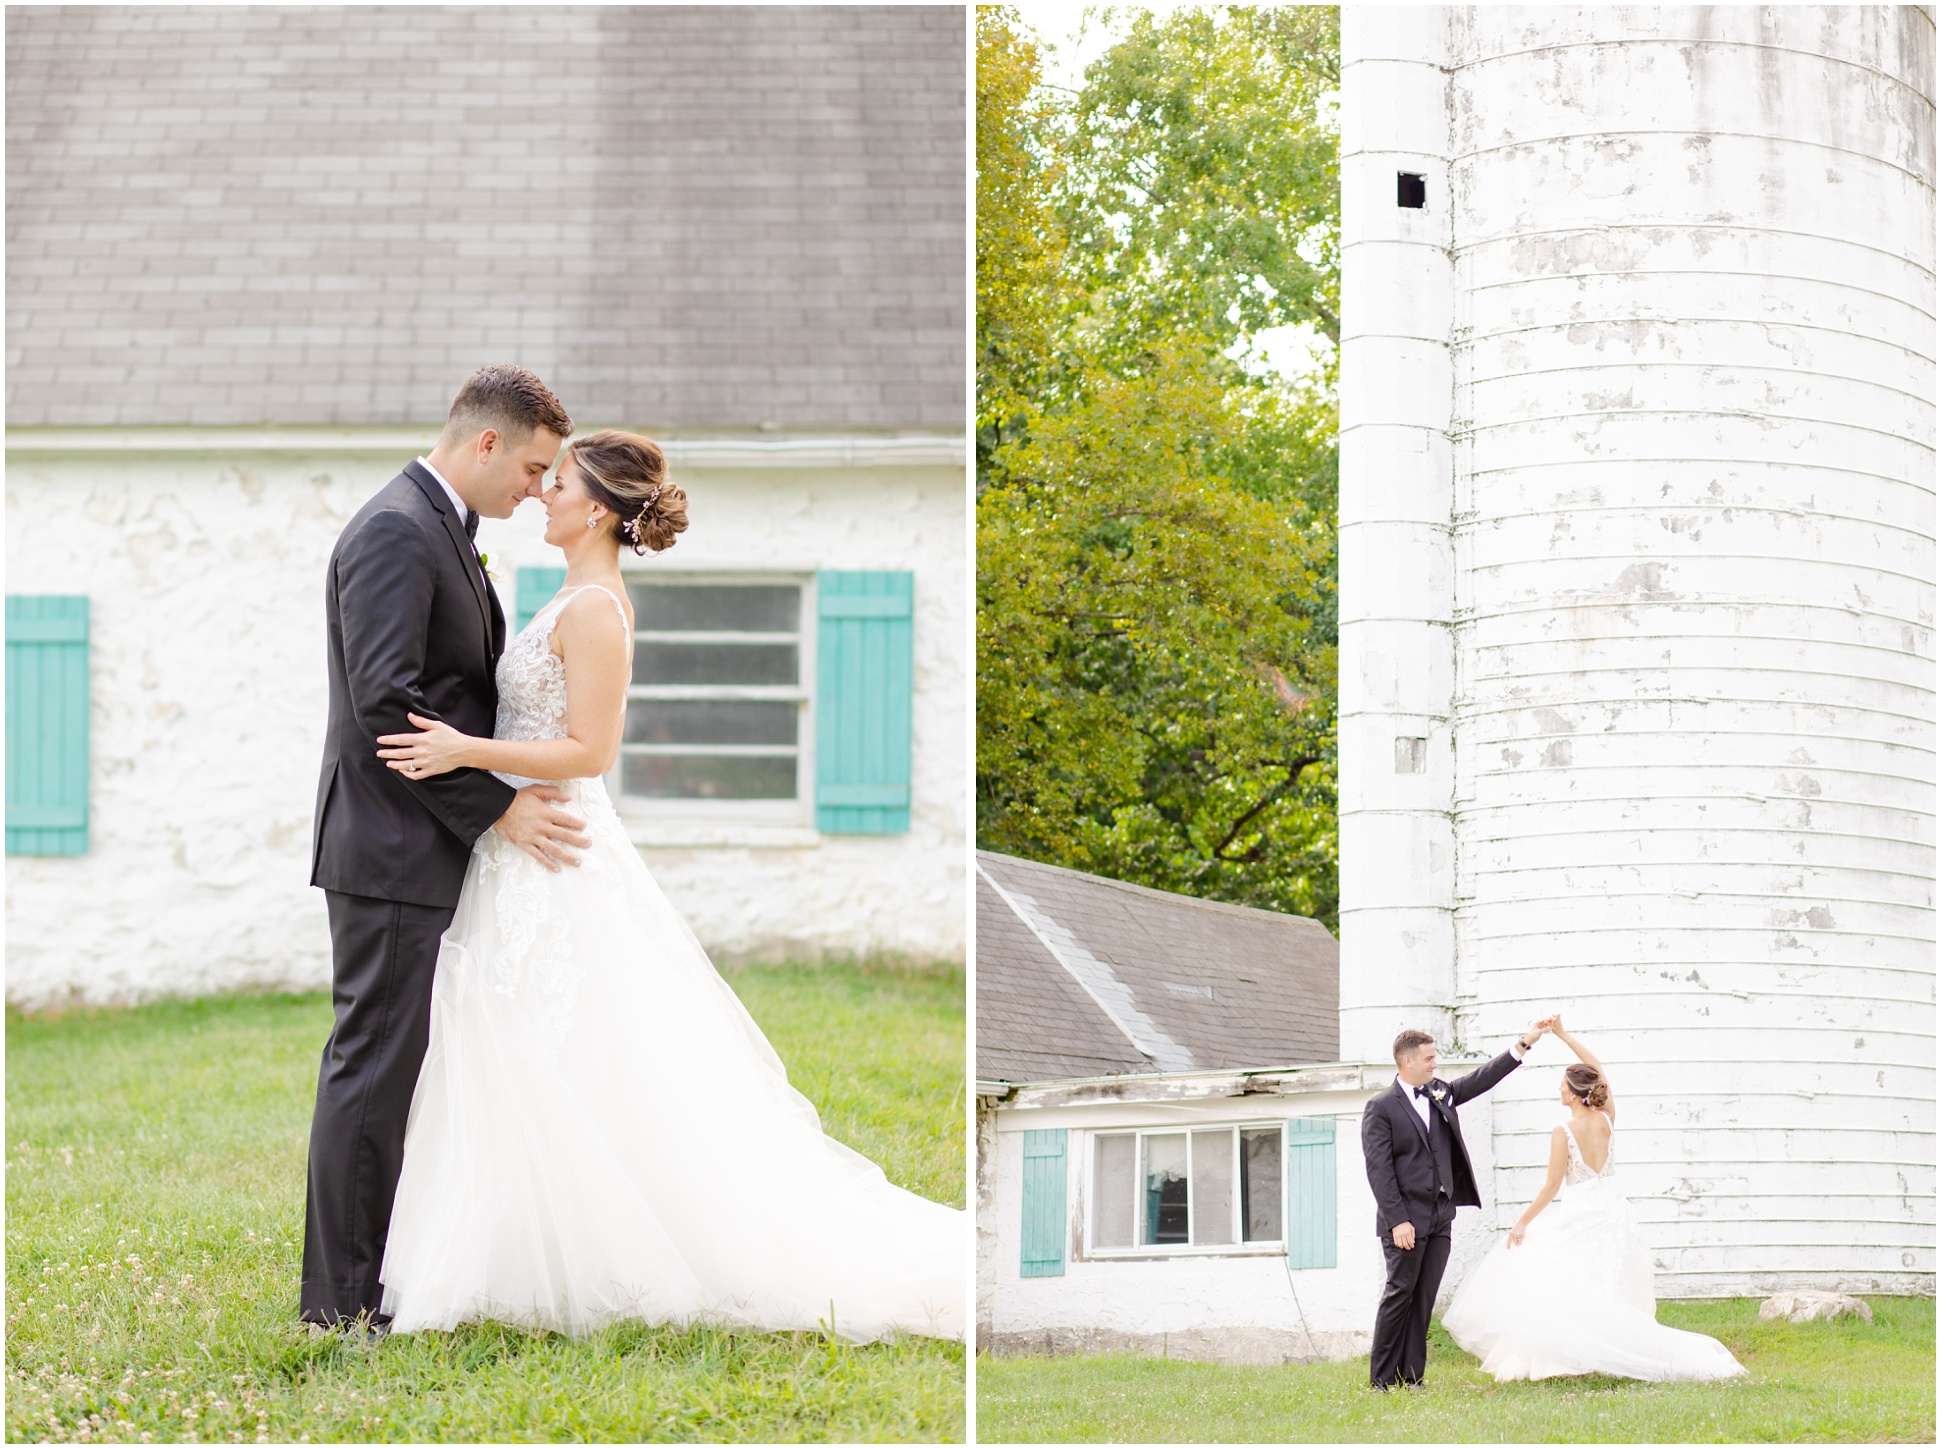 Two images of the bride and groom on the golf green of Eagles Nest Country Club